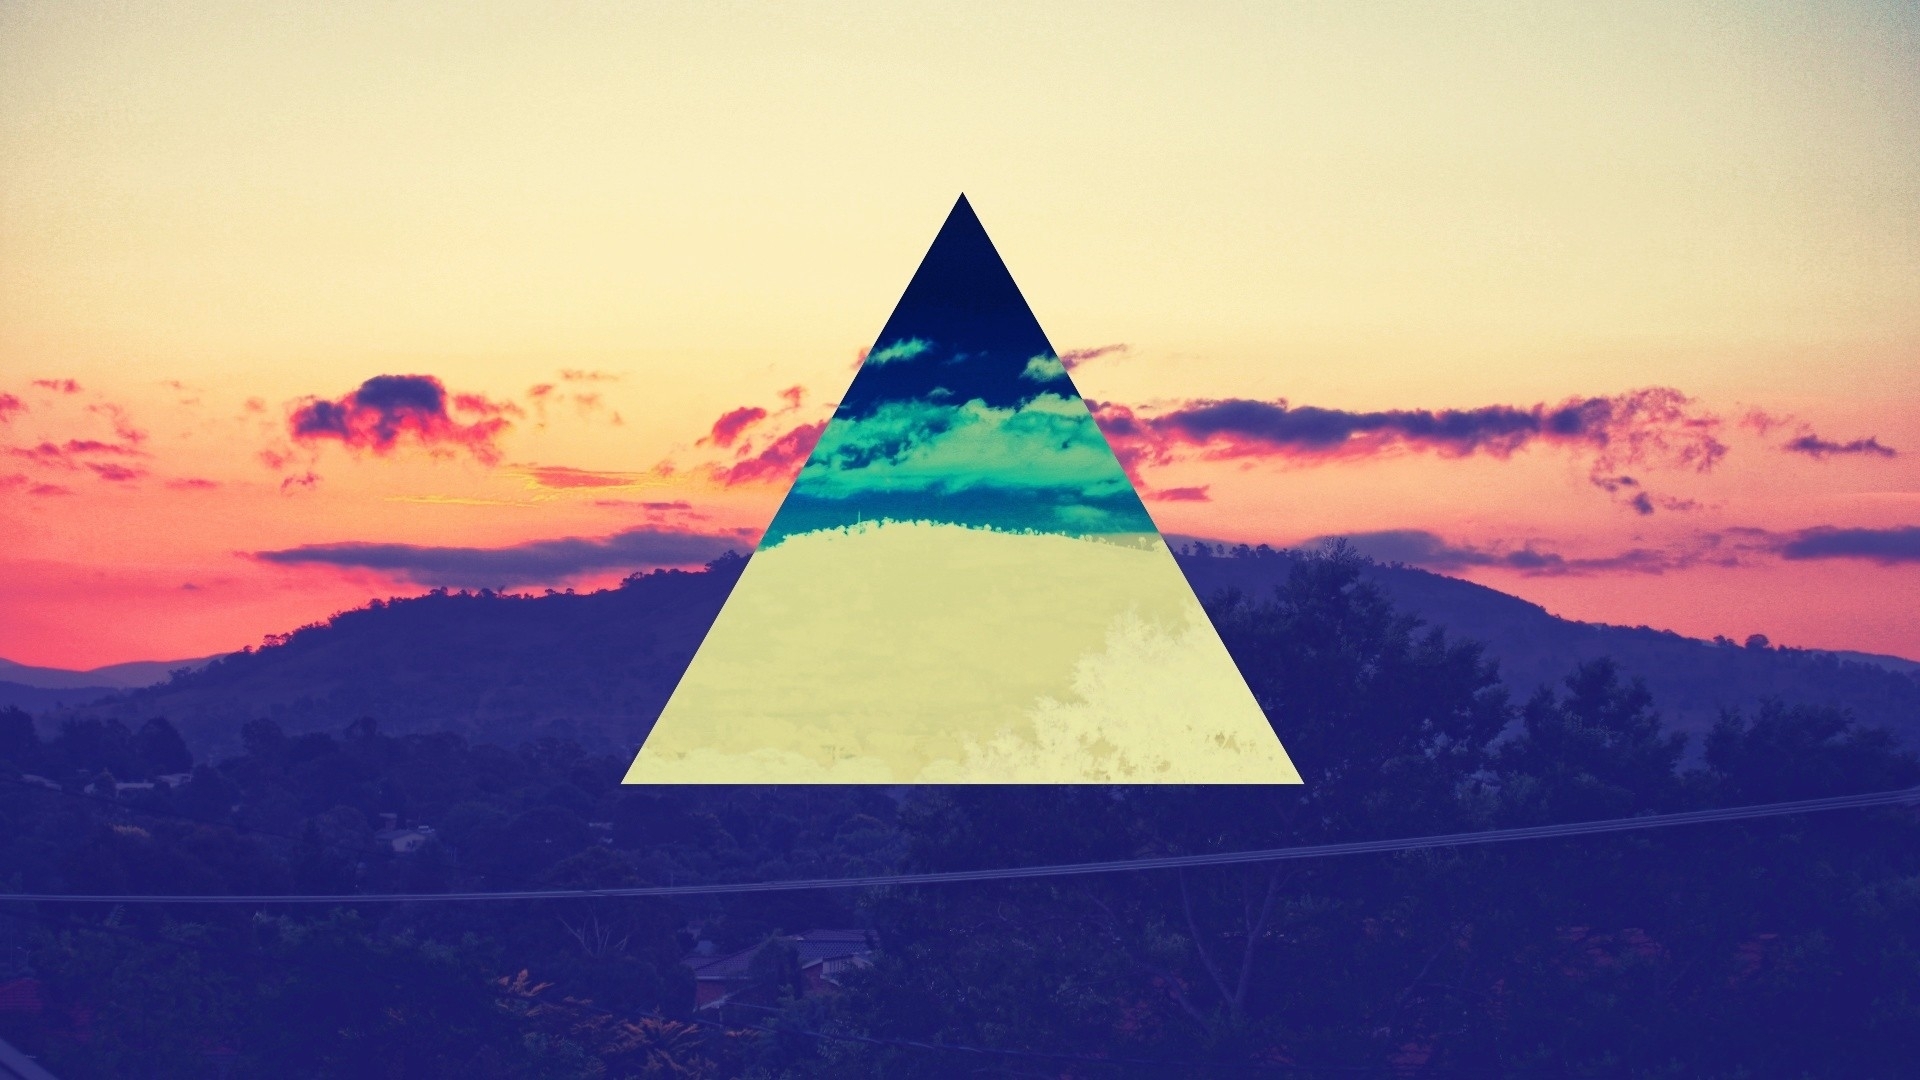  hipster swag color spectrum triangles 1920x1080 wallpaper Wallpaper HD